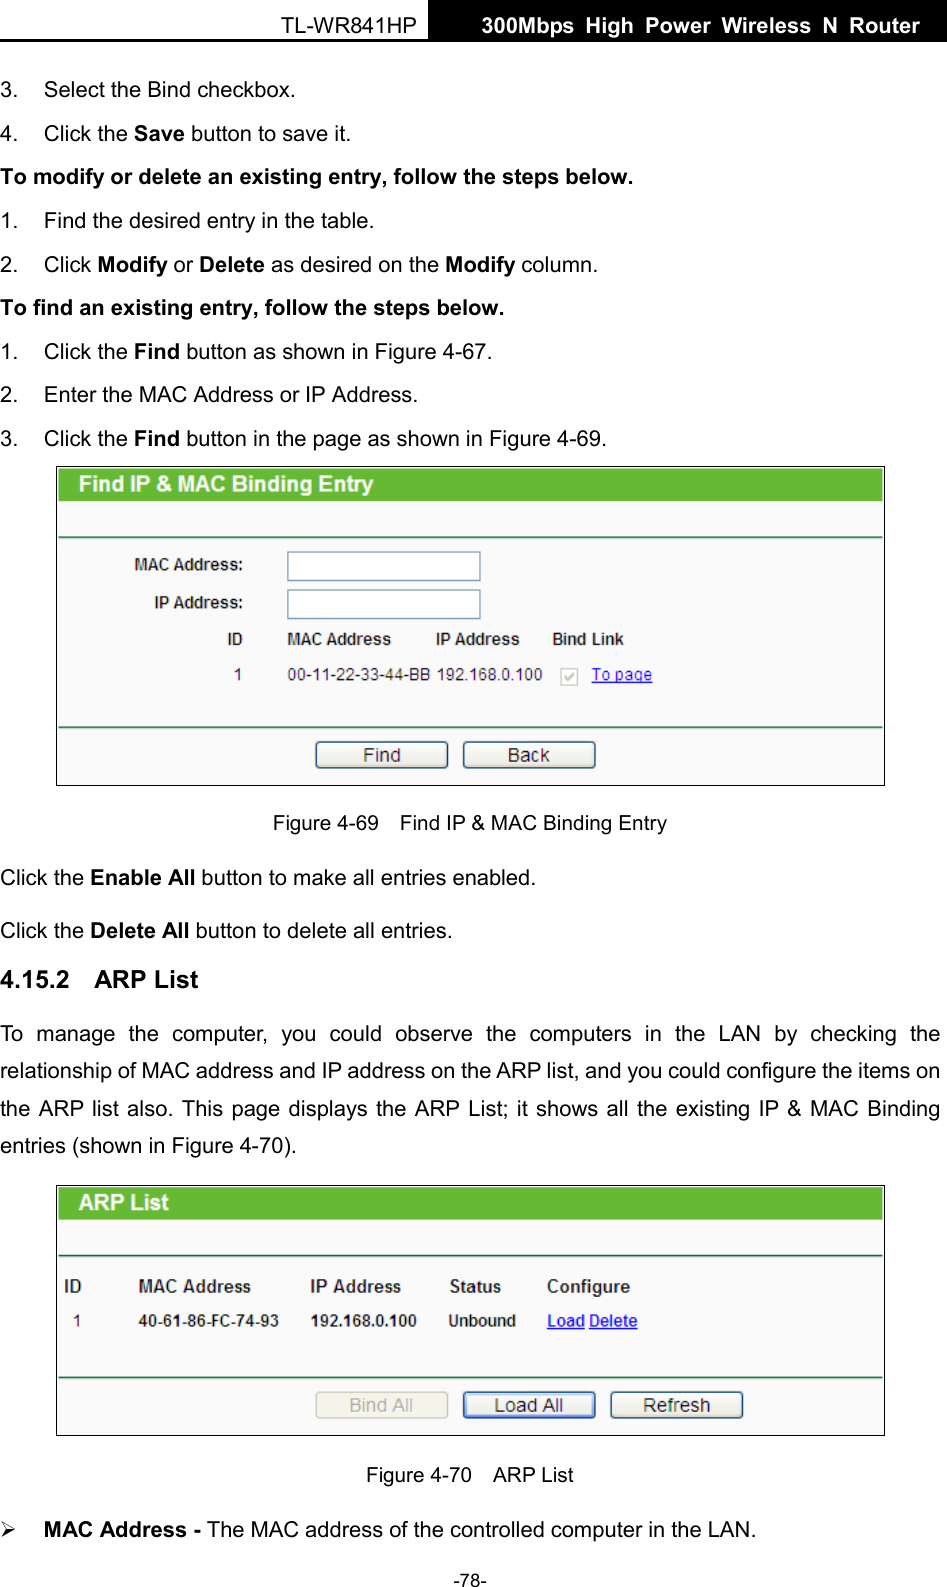  TL-WR841HP  300Mbps High Power Wireless N Router    -78- 3. Select the Bind checkbox.   4. Click the Save button to save it. To modify or delete an existing entry, follow the steps below. 1. Find the desired entry in the table.   2. Click Modify or Delete as desired on the Modify column.   To find an existing entry, follow the steps below. 1. Click the Find button as shown in Figure 4-67. 2. Enter the MAC Address or IP Address. 3. Click the Find button in the page as shown in Figure 4-69.  Figure 4-69  Find IP &amp; MAC Binding Entry Click the Enable All button to make all entries enabled. Click the Delete All button to delete all entries. 4.15.2 ARP List To manage the computer, you could observe the computers in the LAN by checking the relationship of MAC address and IP address on the ARP list, and you could configure the items on the ARP list also. This page displays the ARP List; it shows all the existing IP &amp; MAC Binding entries (shown in Figure 4-70).    Figure 4-70  ARP List  MAC Address - The MAC address of the controlled computer in the LAN.   